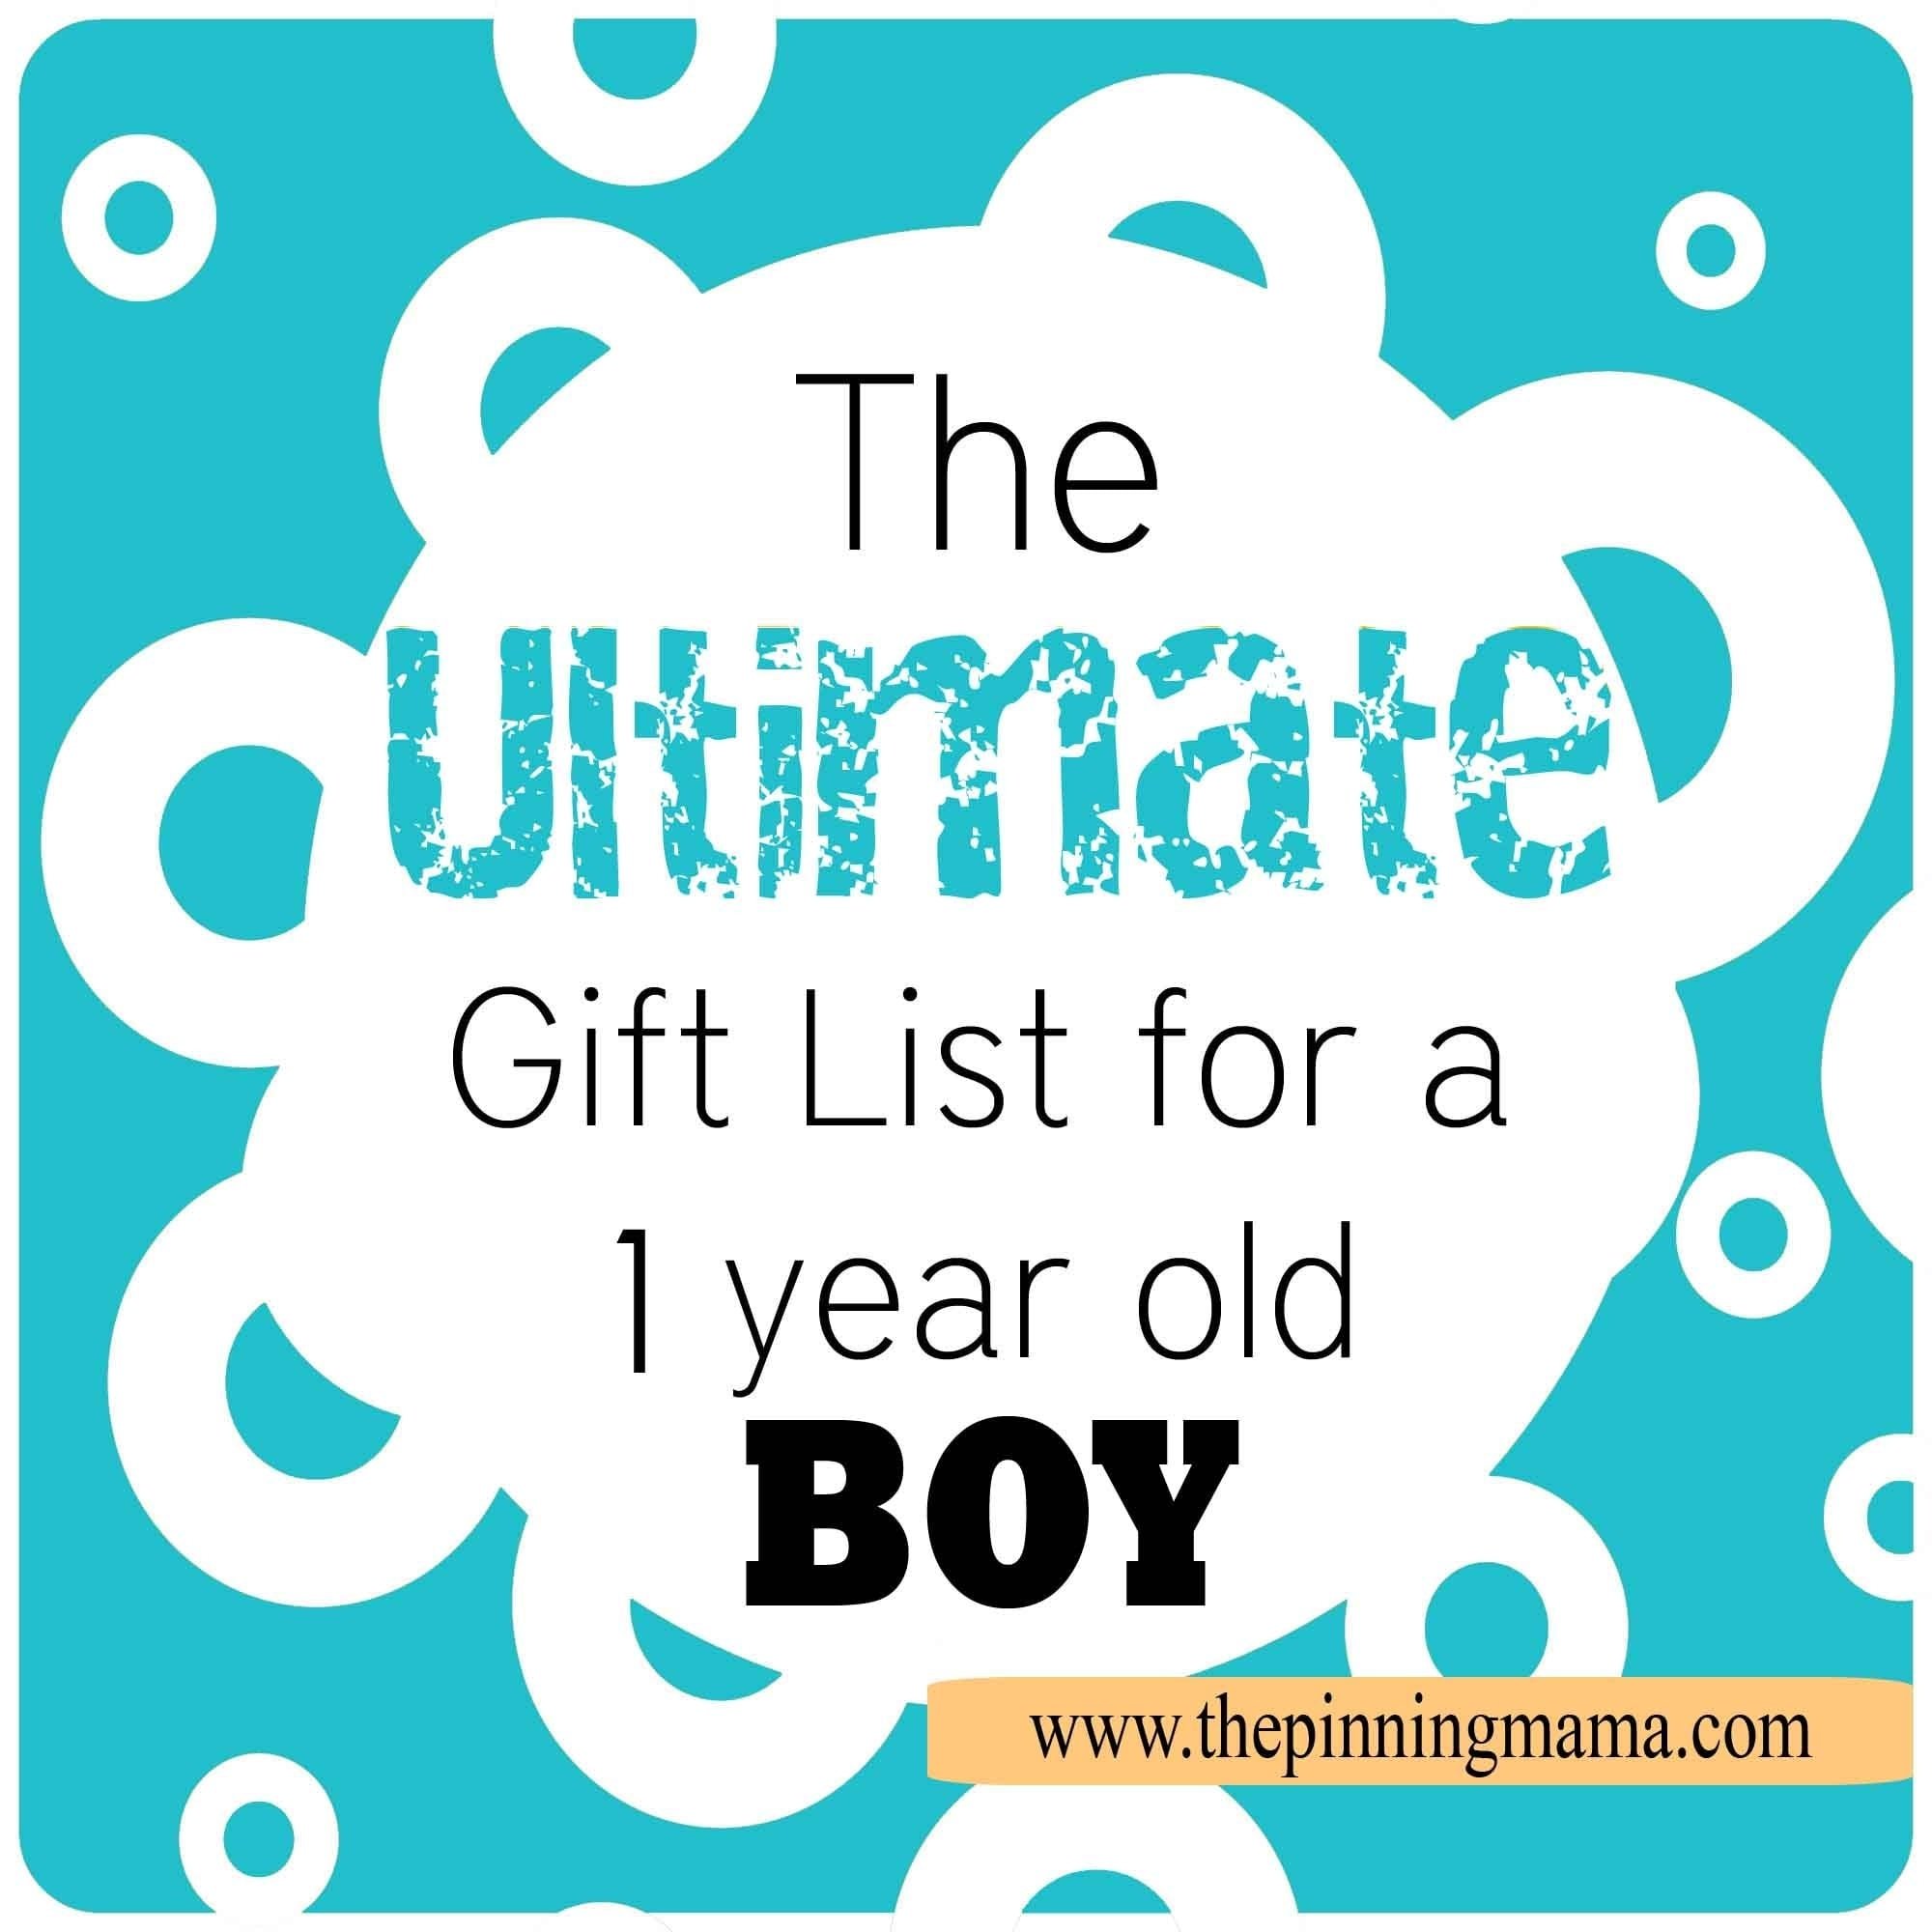 10 Great Gift Ideas For A One Year Old Boy the ultimate gift list for a 1 year old boy e280a2 the pinning mama 10 2022